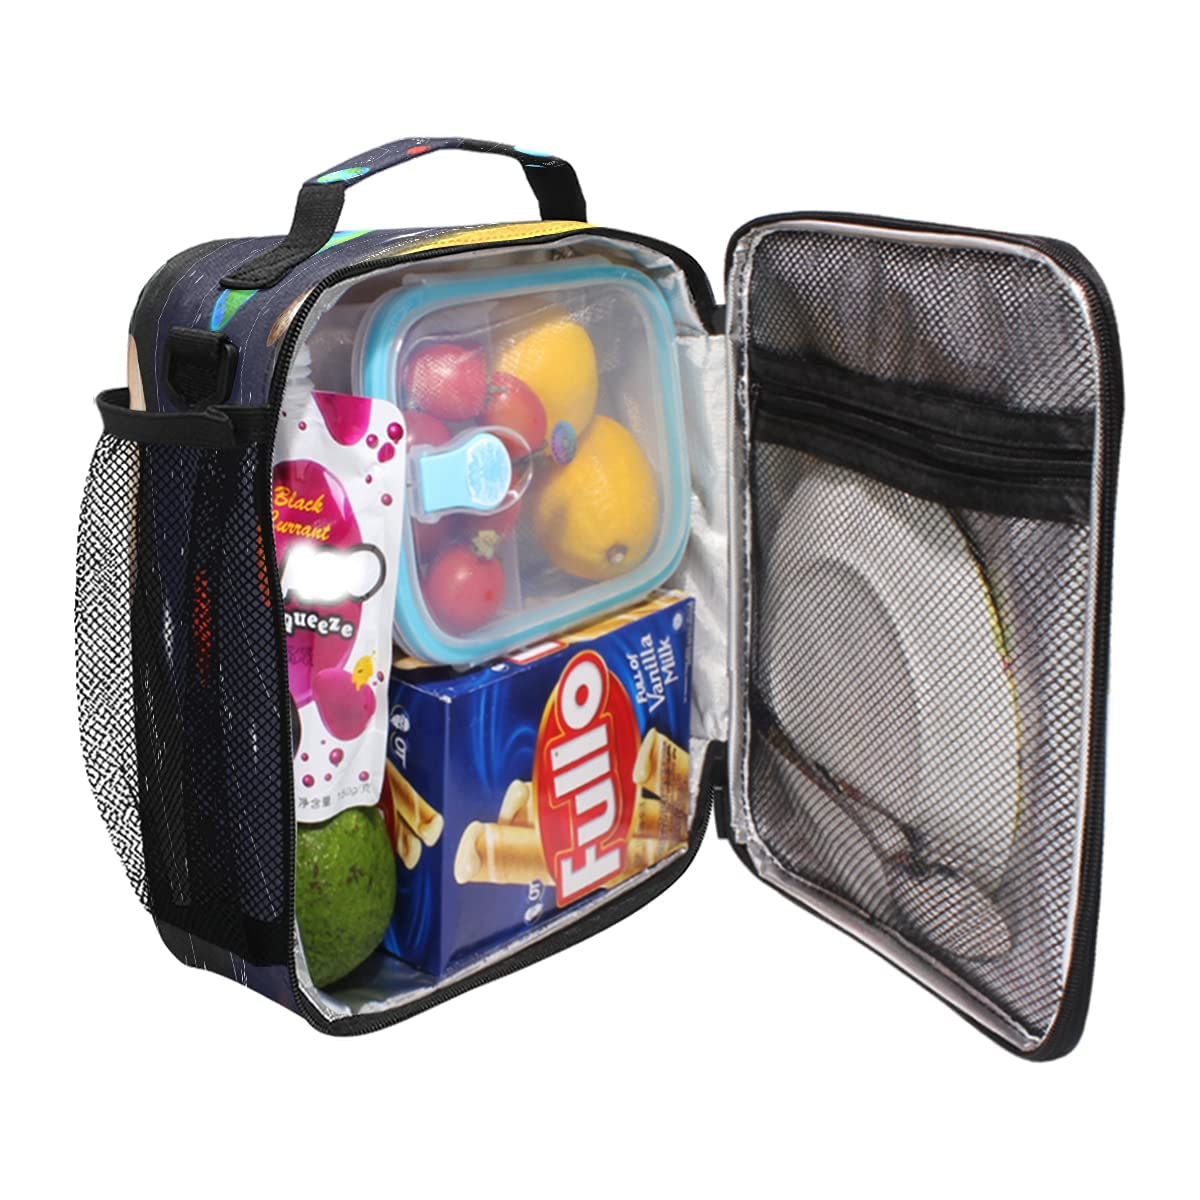 AUUXVA Kids Lunch Box, Planets Color, Unisex, 10.5x3.5x9.5 Inch, Oxford Material and Aluminum Film, Spacious, Lightweight, Adjustable Shoulder Straps, Heat Insulation